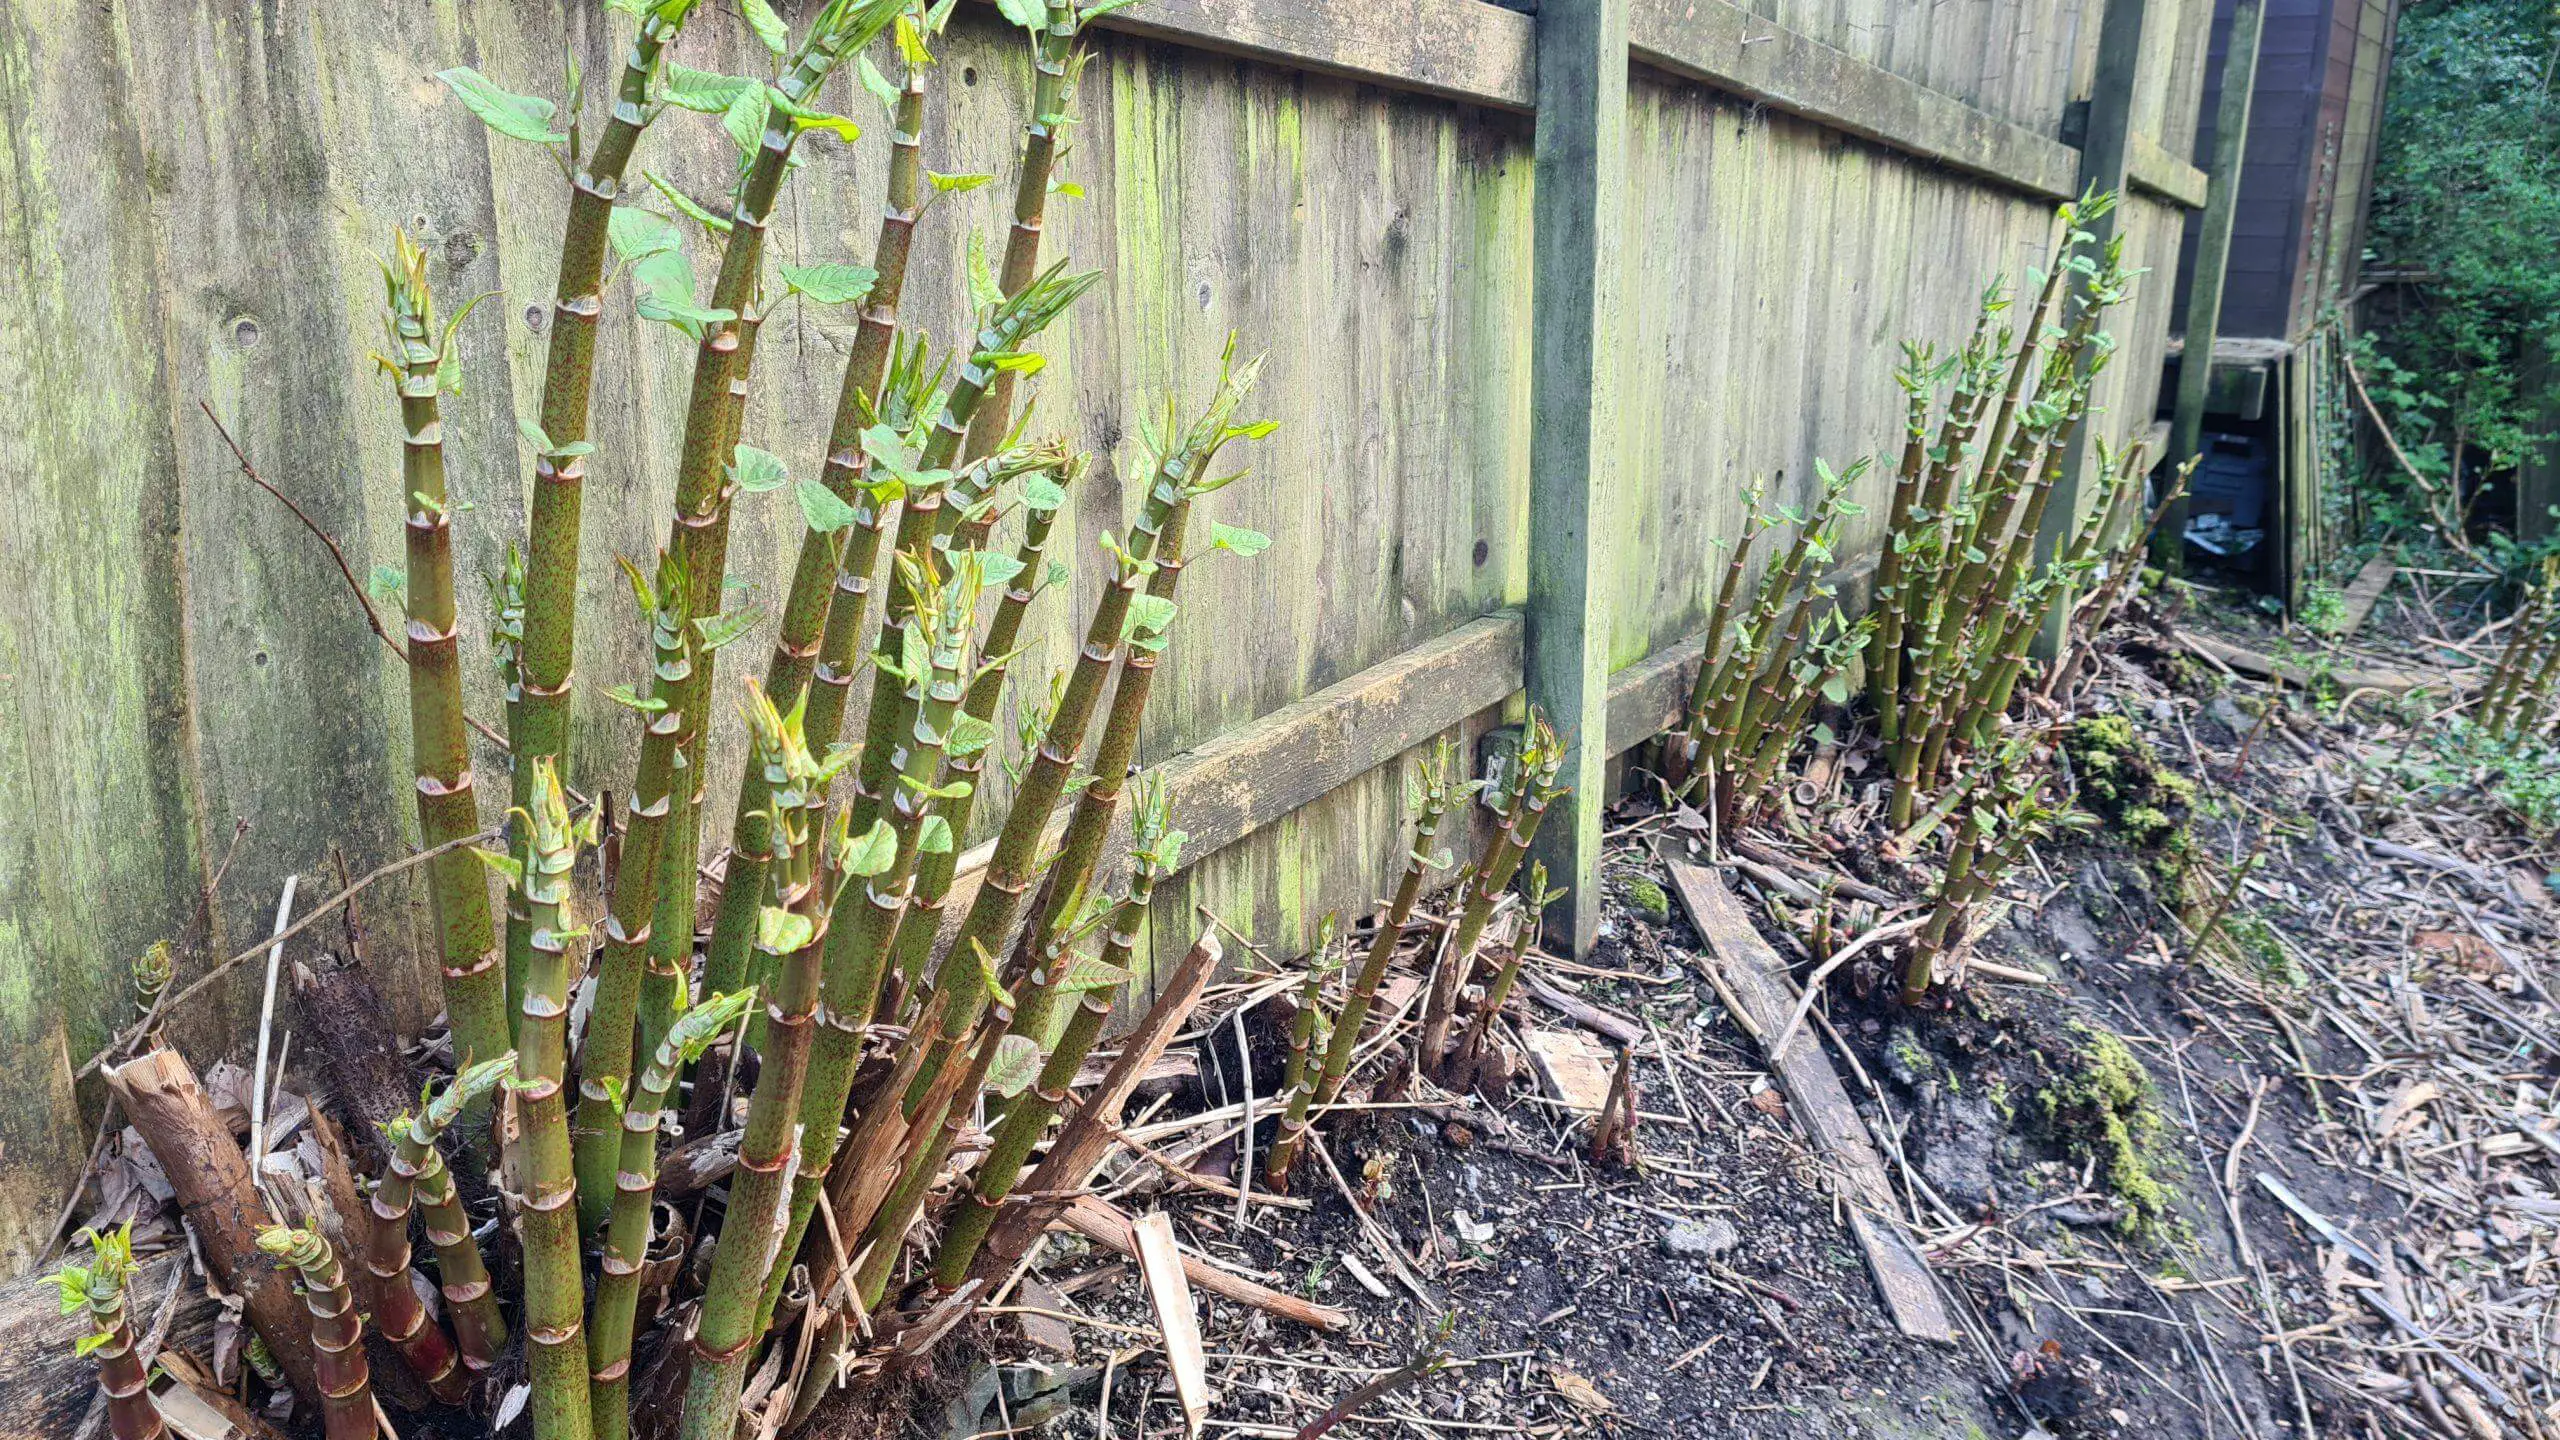 Removing Japanese knotweed from a boundary is essential to prevent it spreading